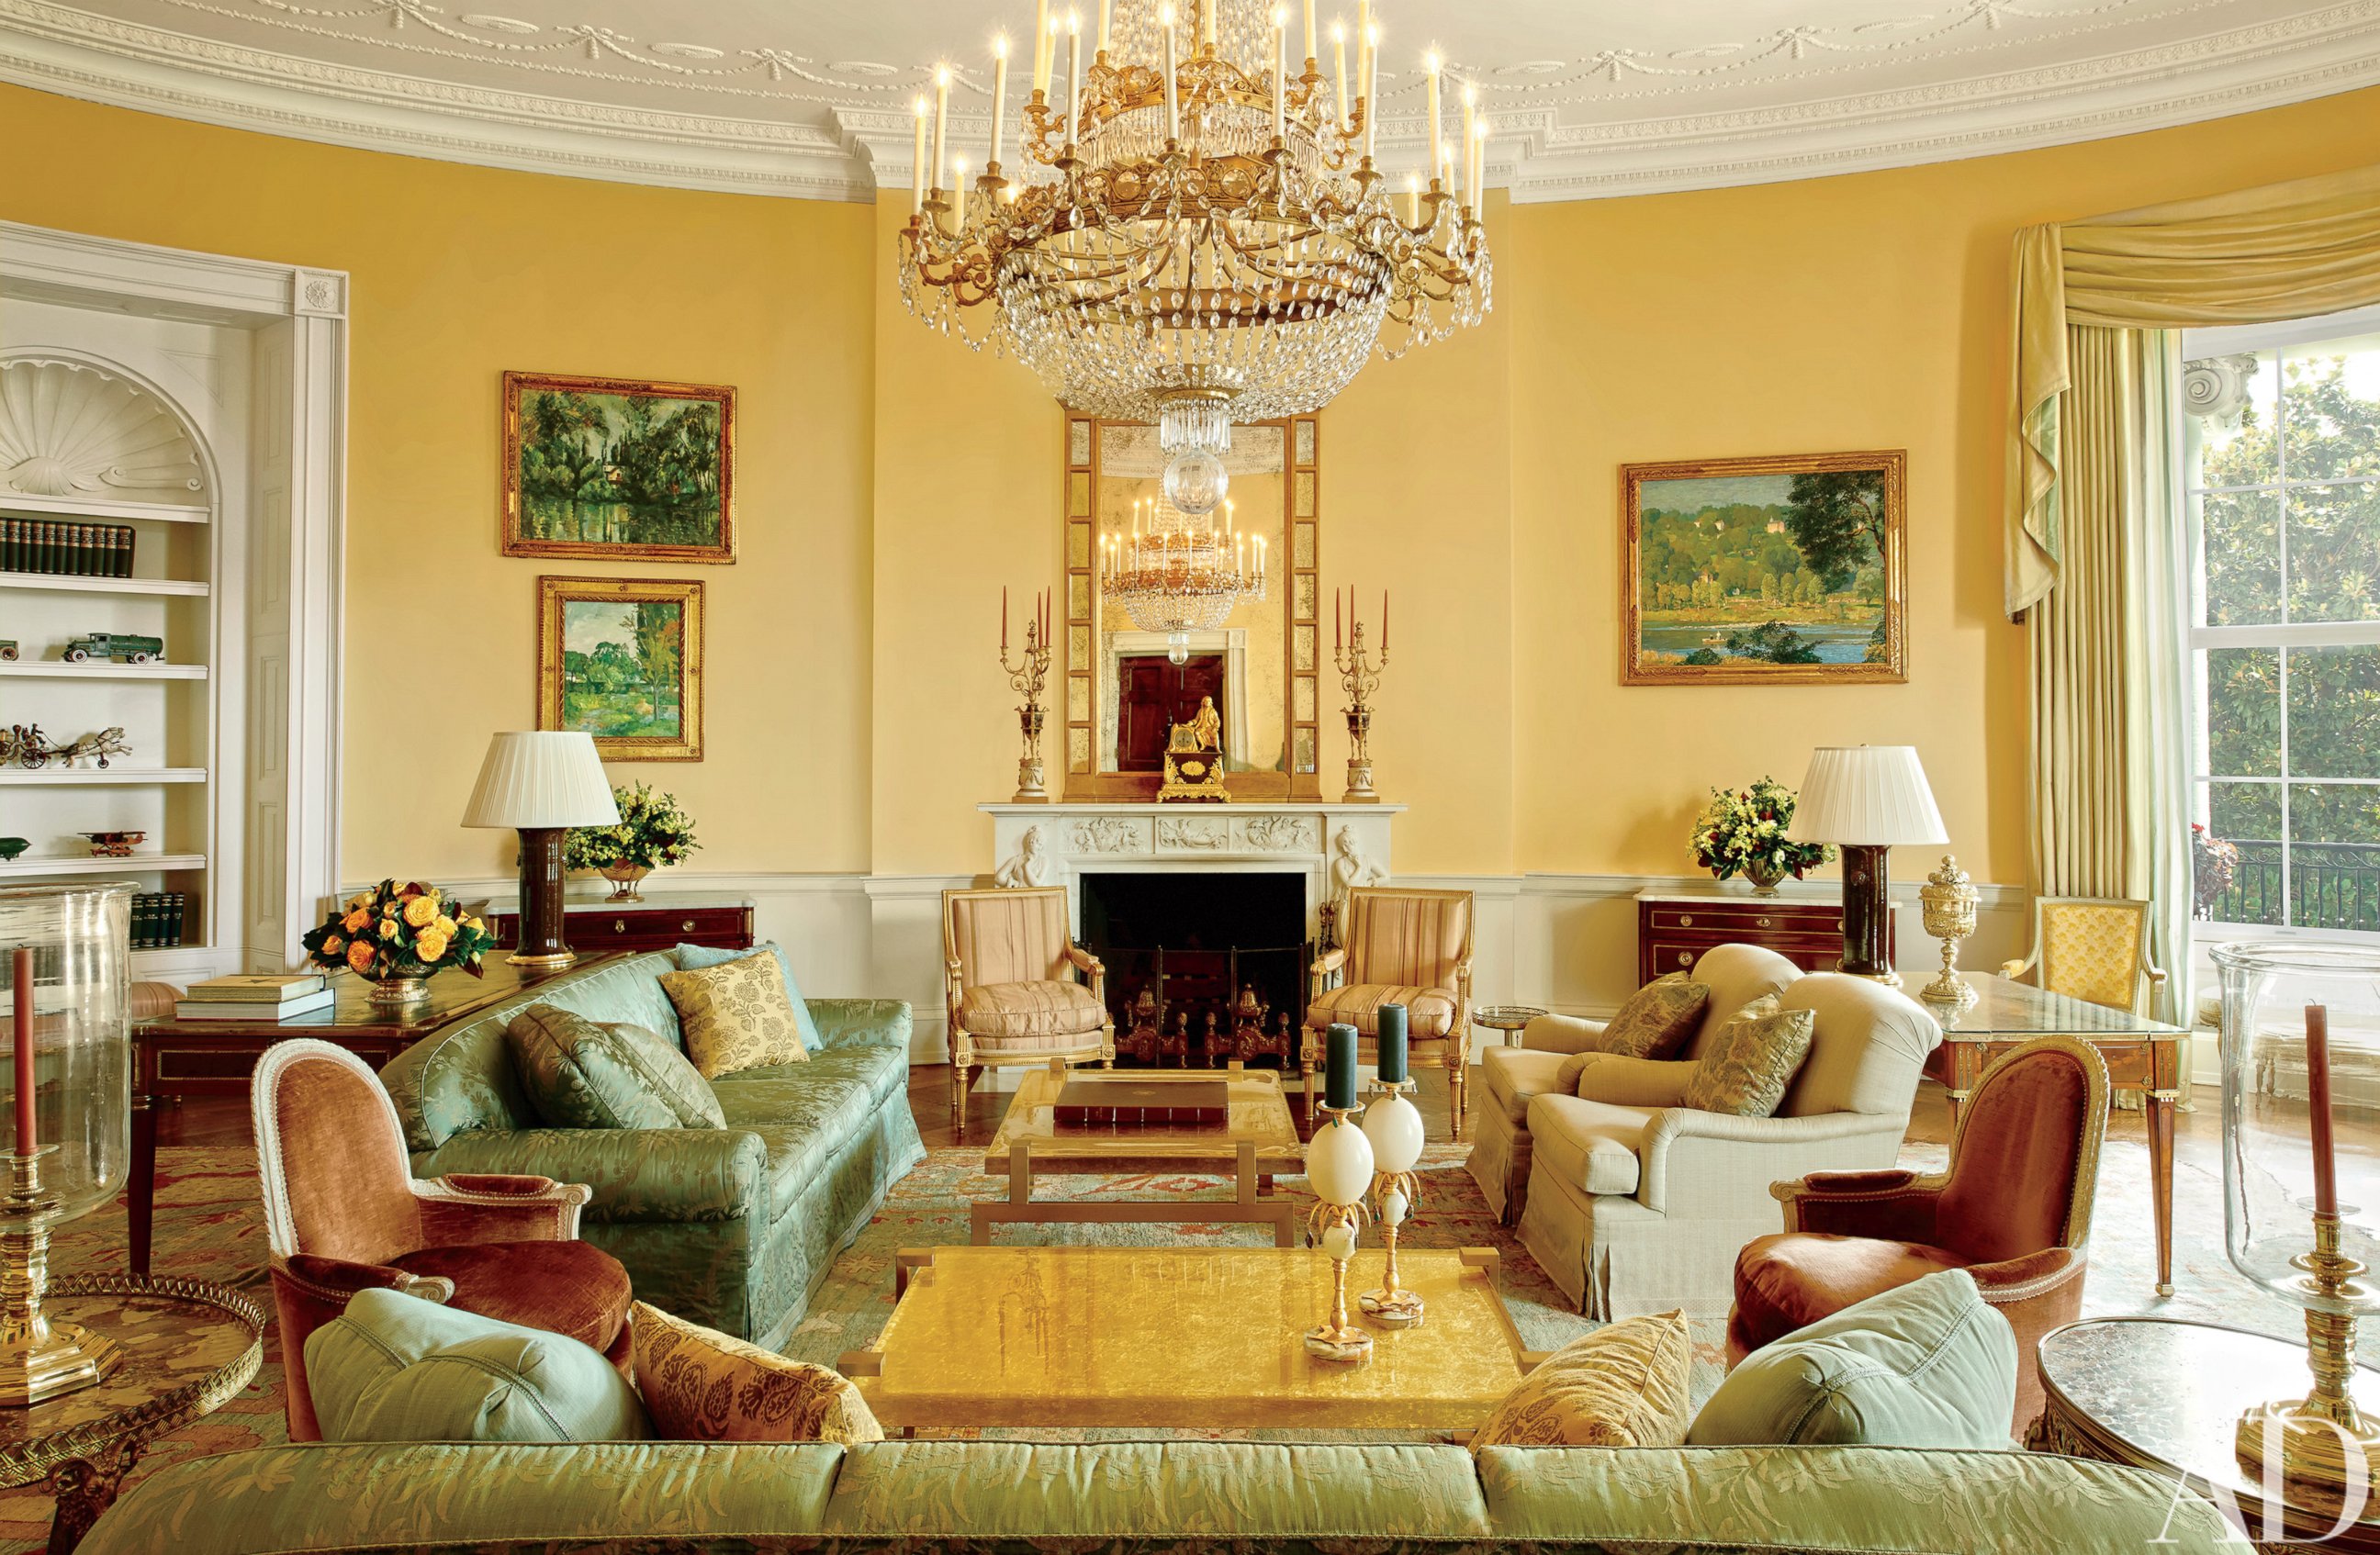 PHOTO: The Yellow Oval Room has been used as a formal living room and also as a private sitting room. Architectural Digest's December issue features a look inside the White House and the Obama family's private quarters.